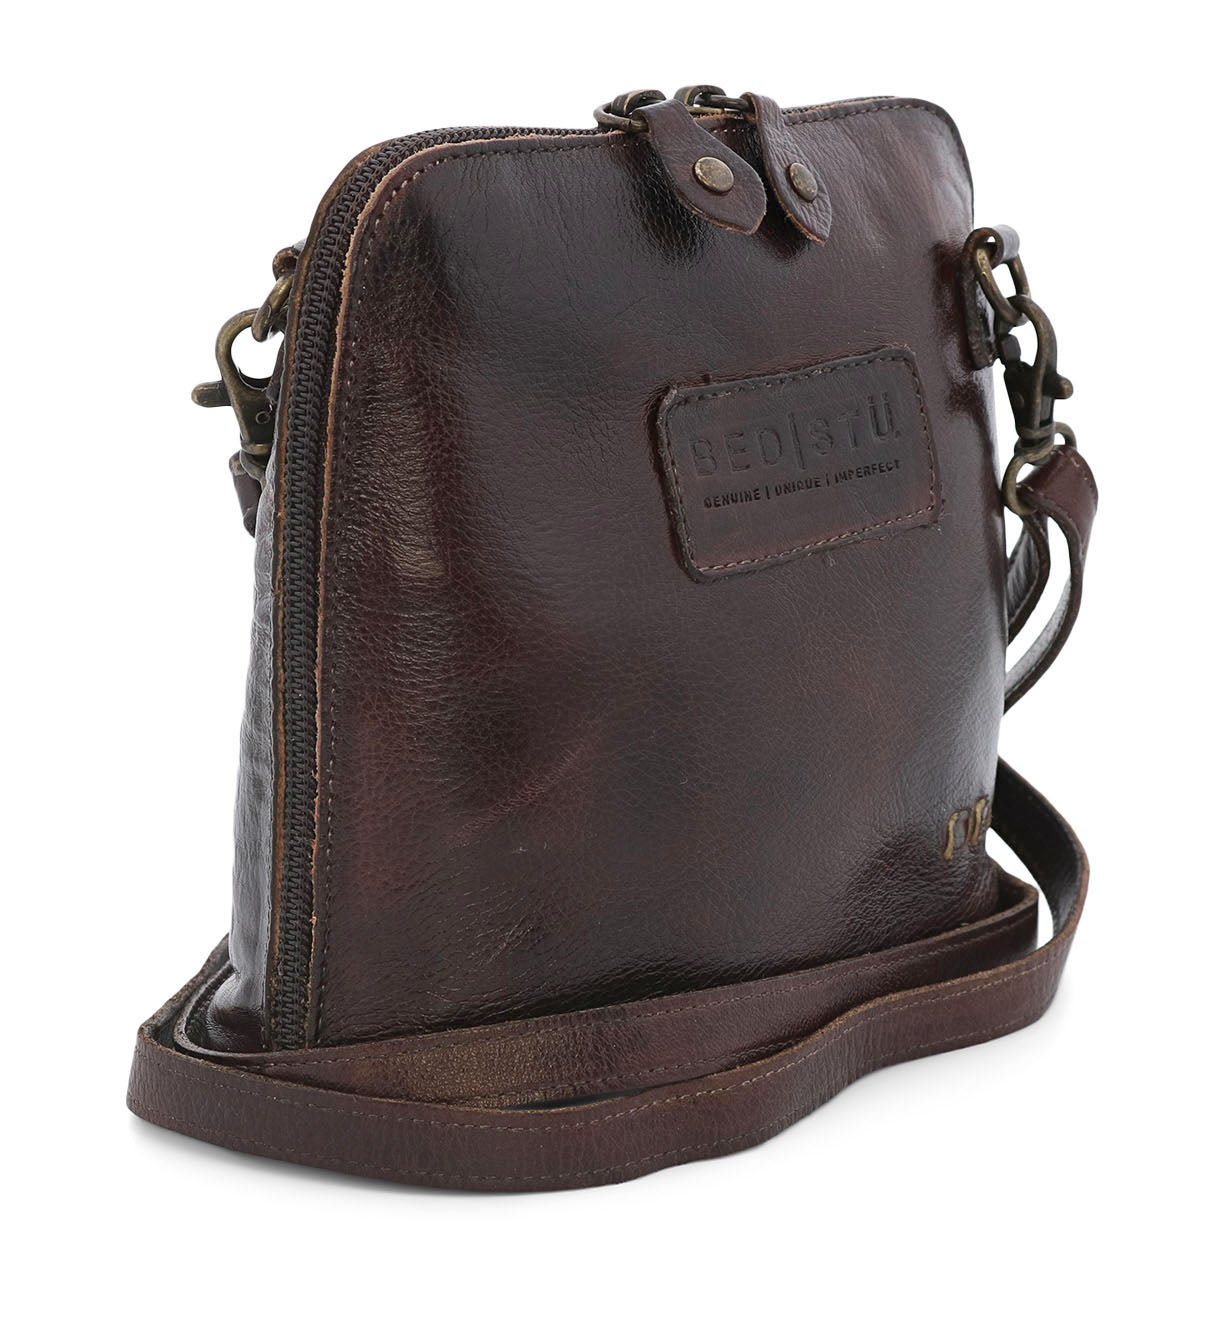 A brown leather Ventura cross body bag with a strap by Bed Stu.